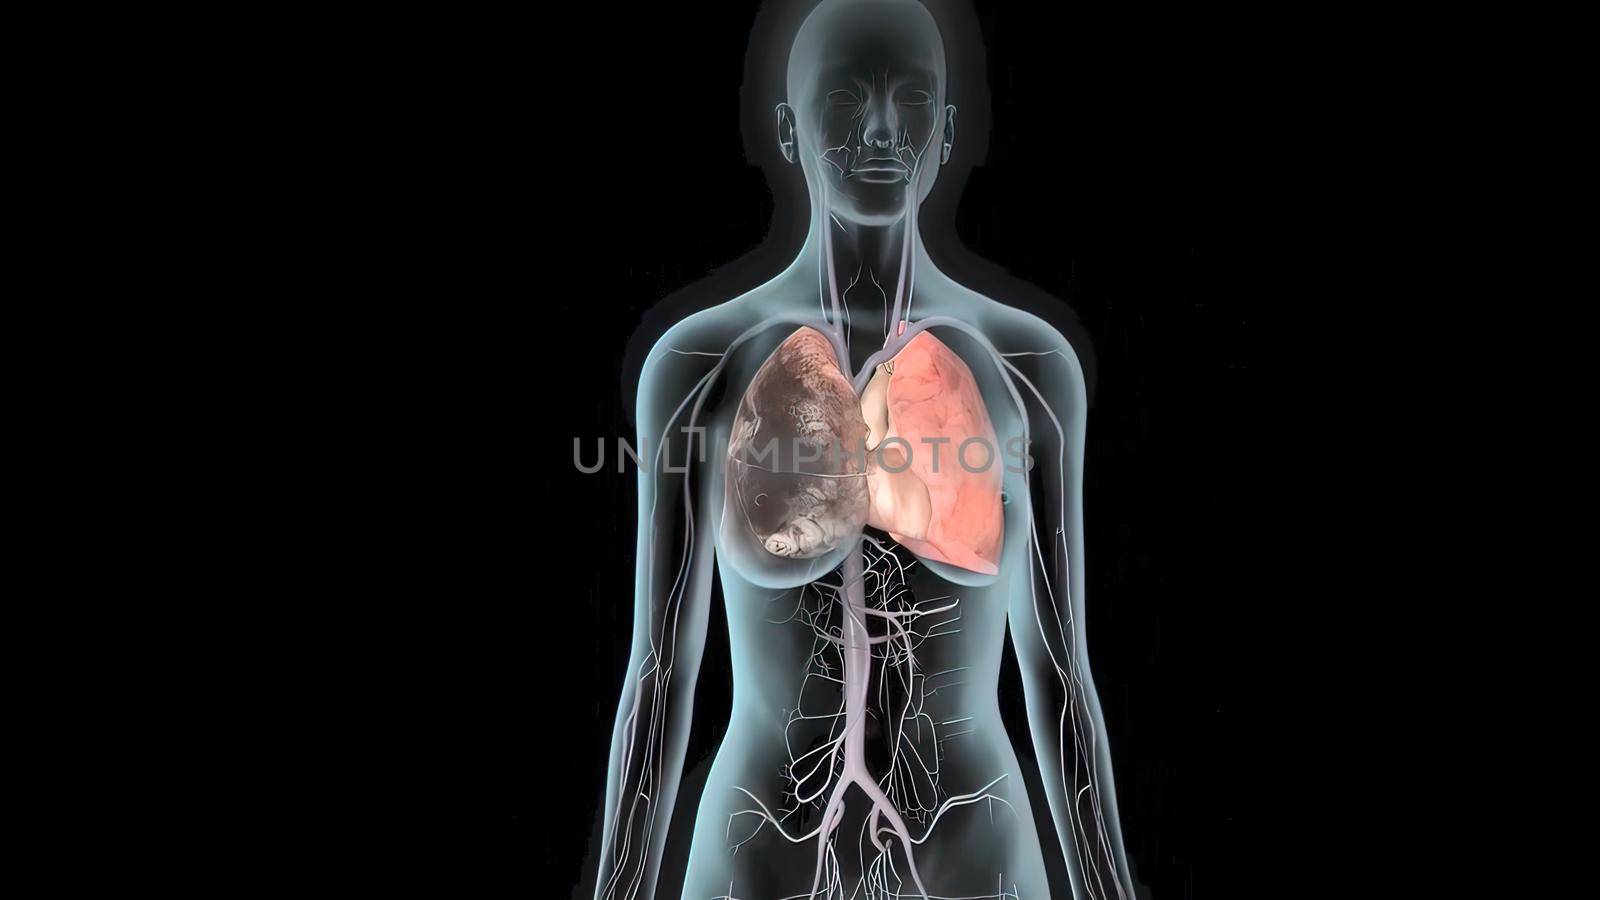 Pulmonary embolism occurs when a clump of material, most often a blood clot, gets wedged into an artery in your lungs. 3D Illustration